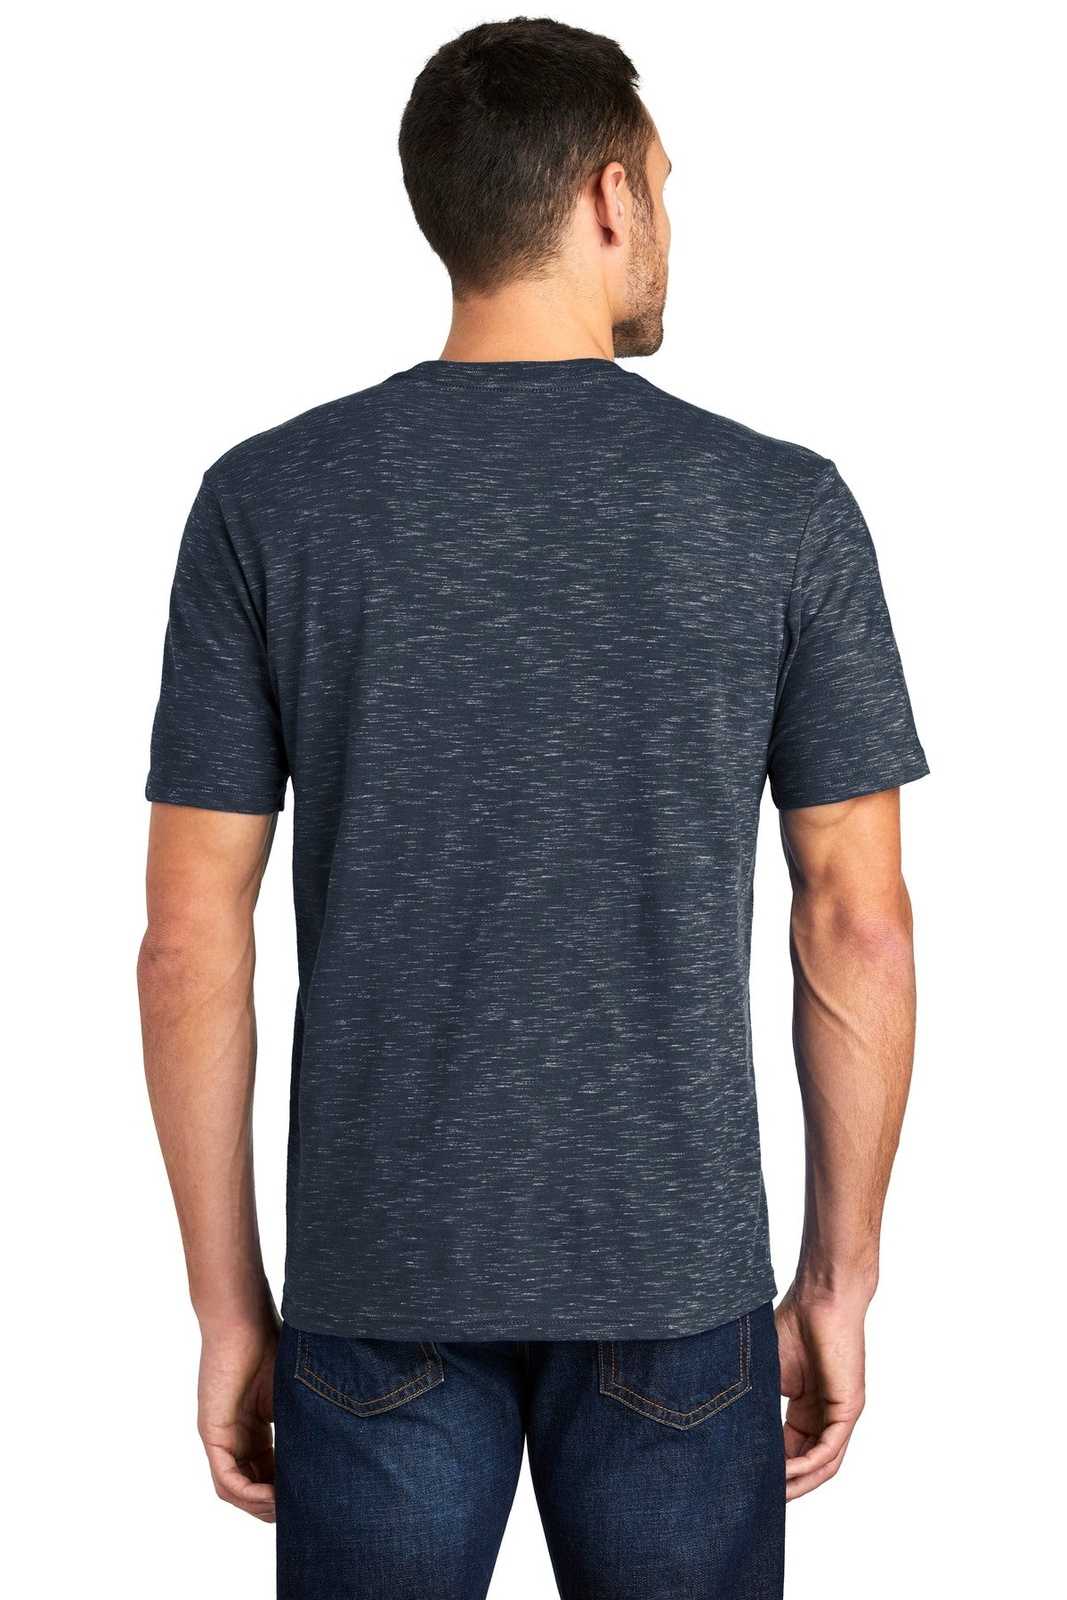 District DT564 Medal Tee - New Navy - HIT a Double - 2